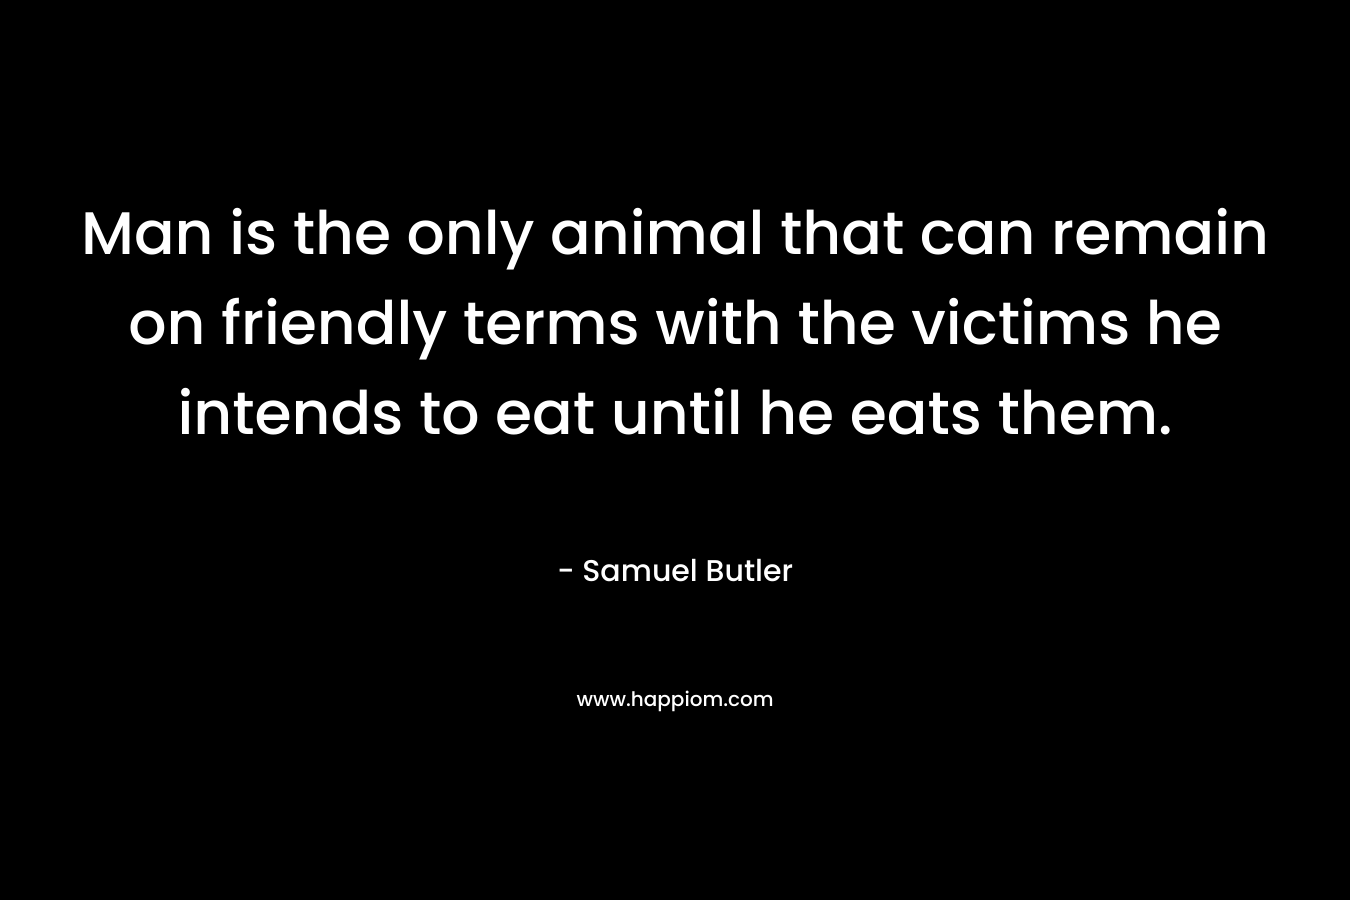 Man is the only animal that can remain on friendly terms with the victims he intends to eat until he eats them. – Samuel Butler